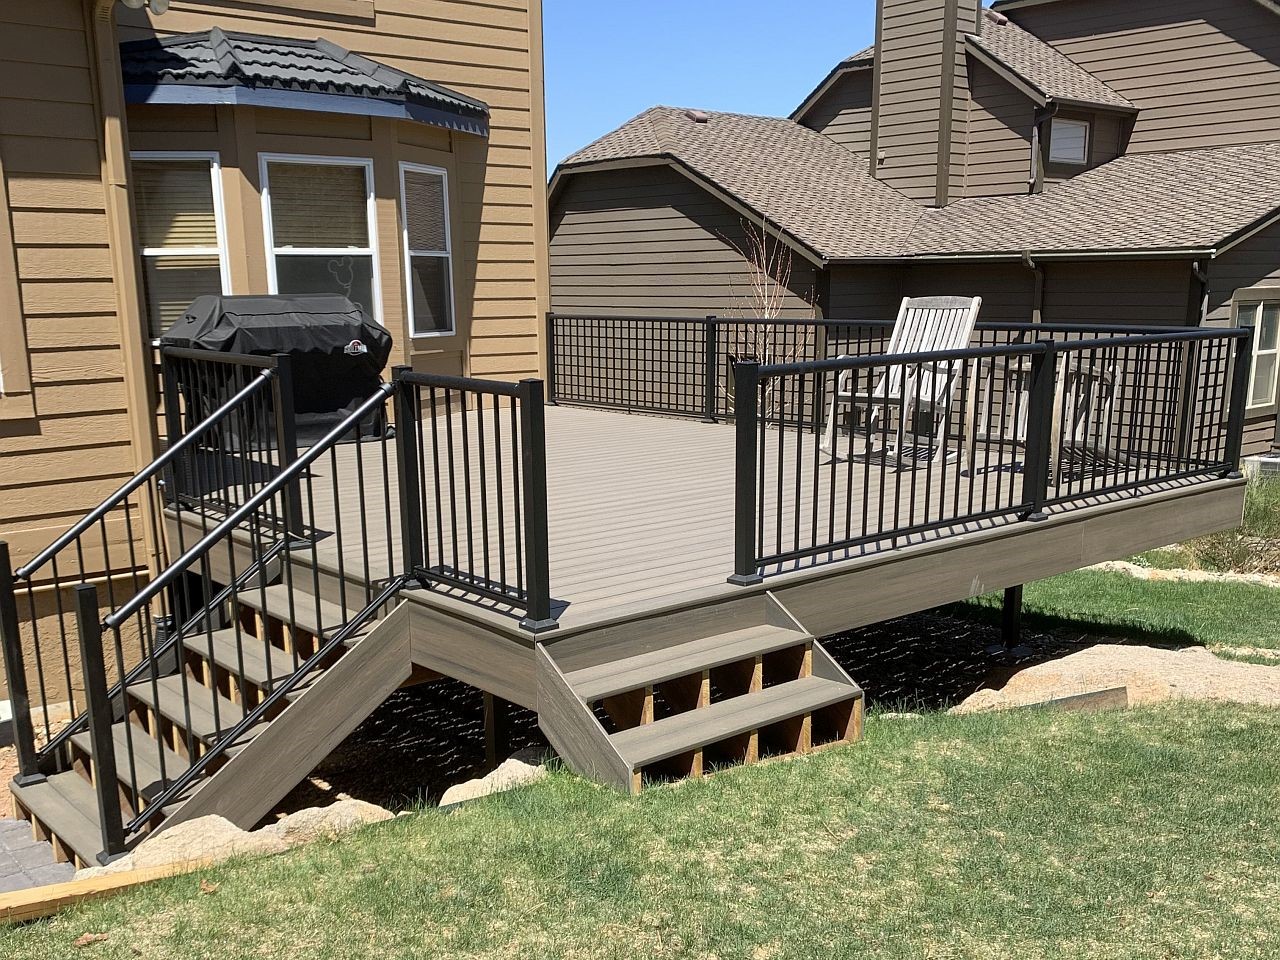 Composite deck with gray decking and a metal panel railing in a matte black. There are two sets of stairs for access to the yard.